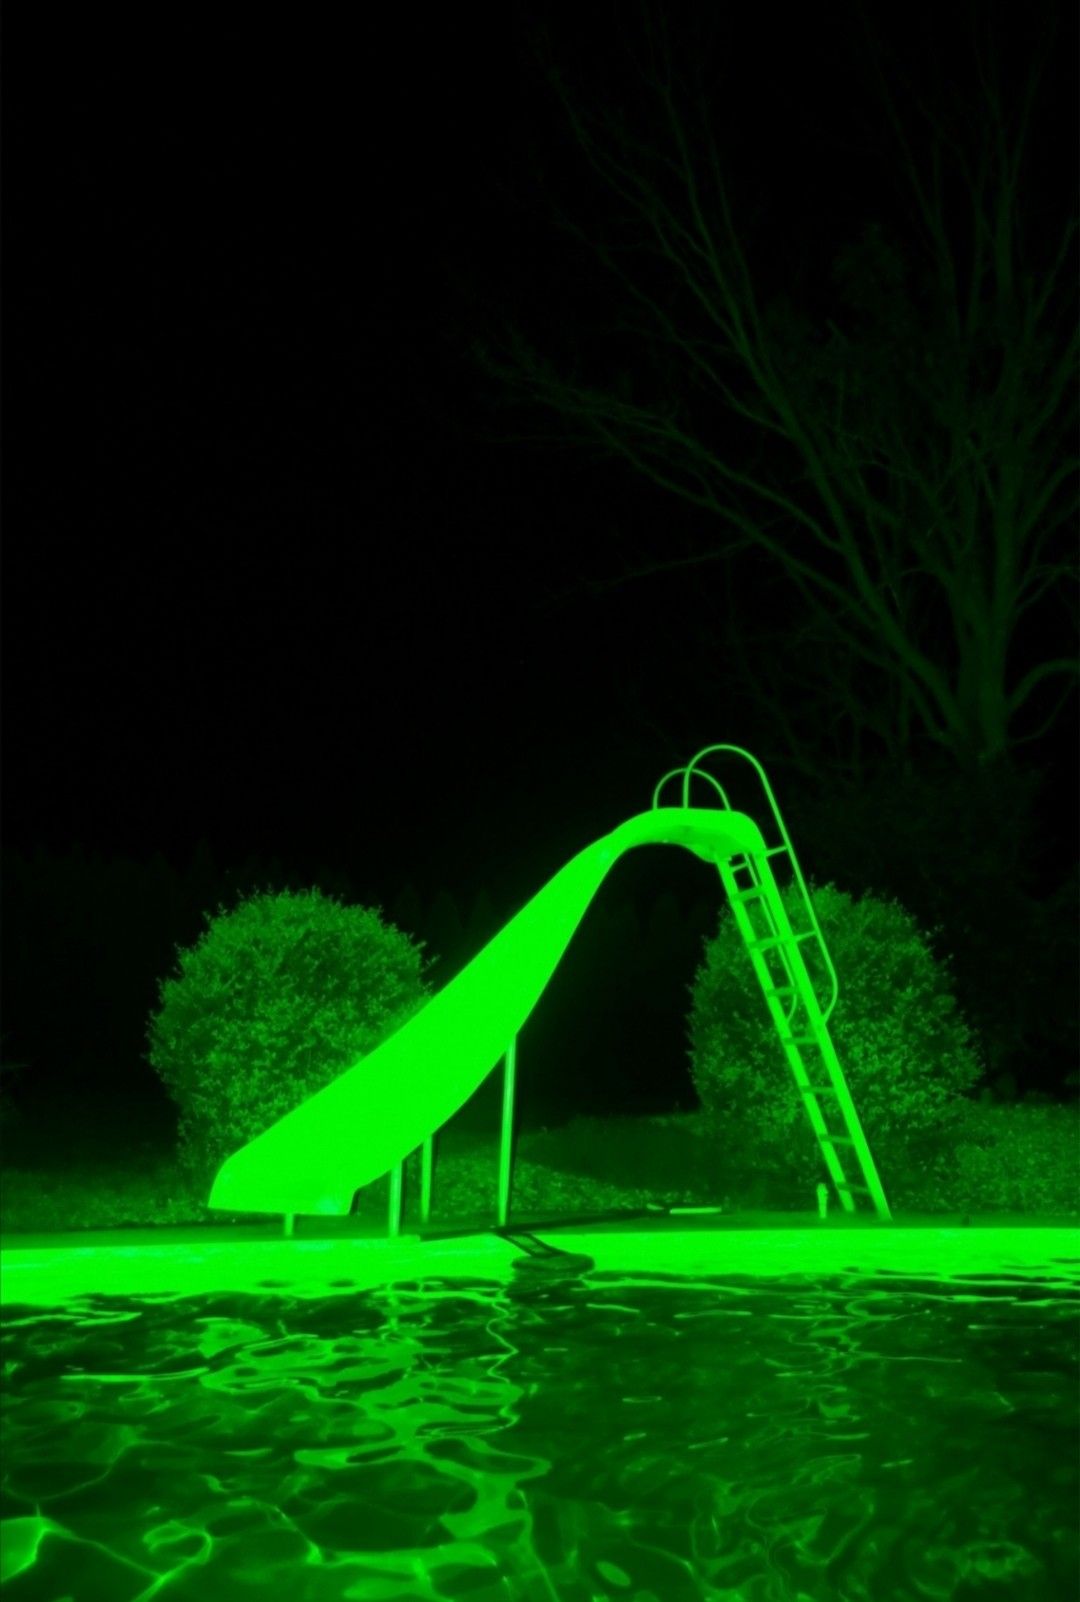 image about alternative world (green). See more about aesthetic, green and neon